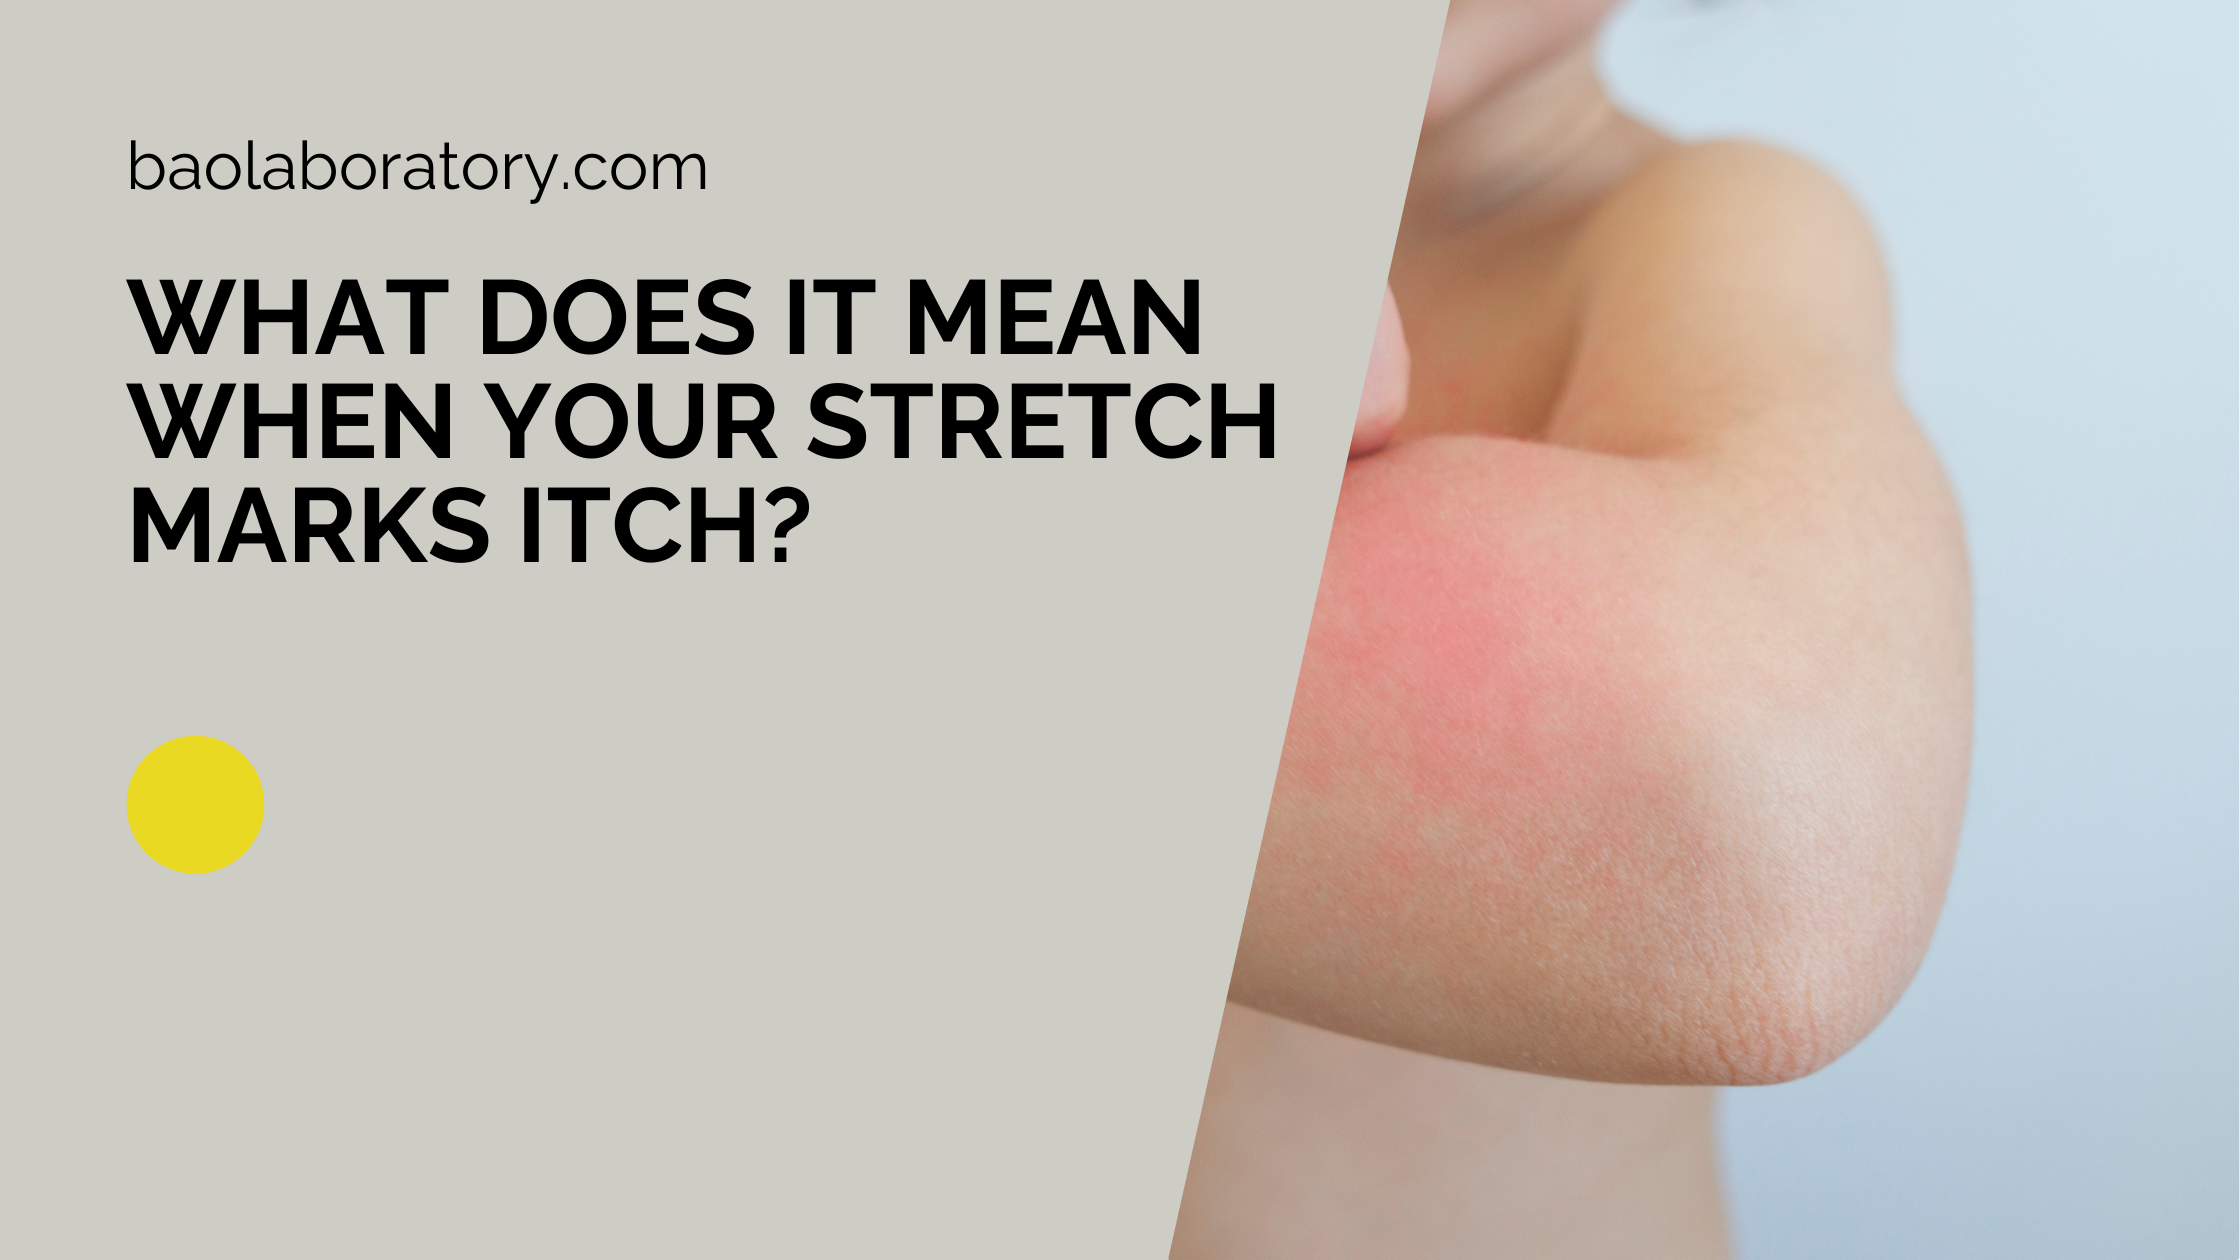 What Does It Mean When Your Stretch Marks Itch